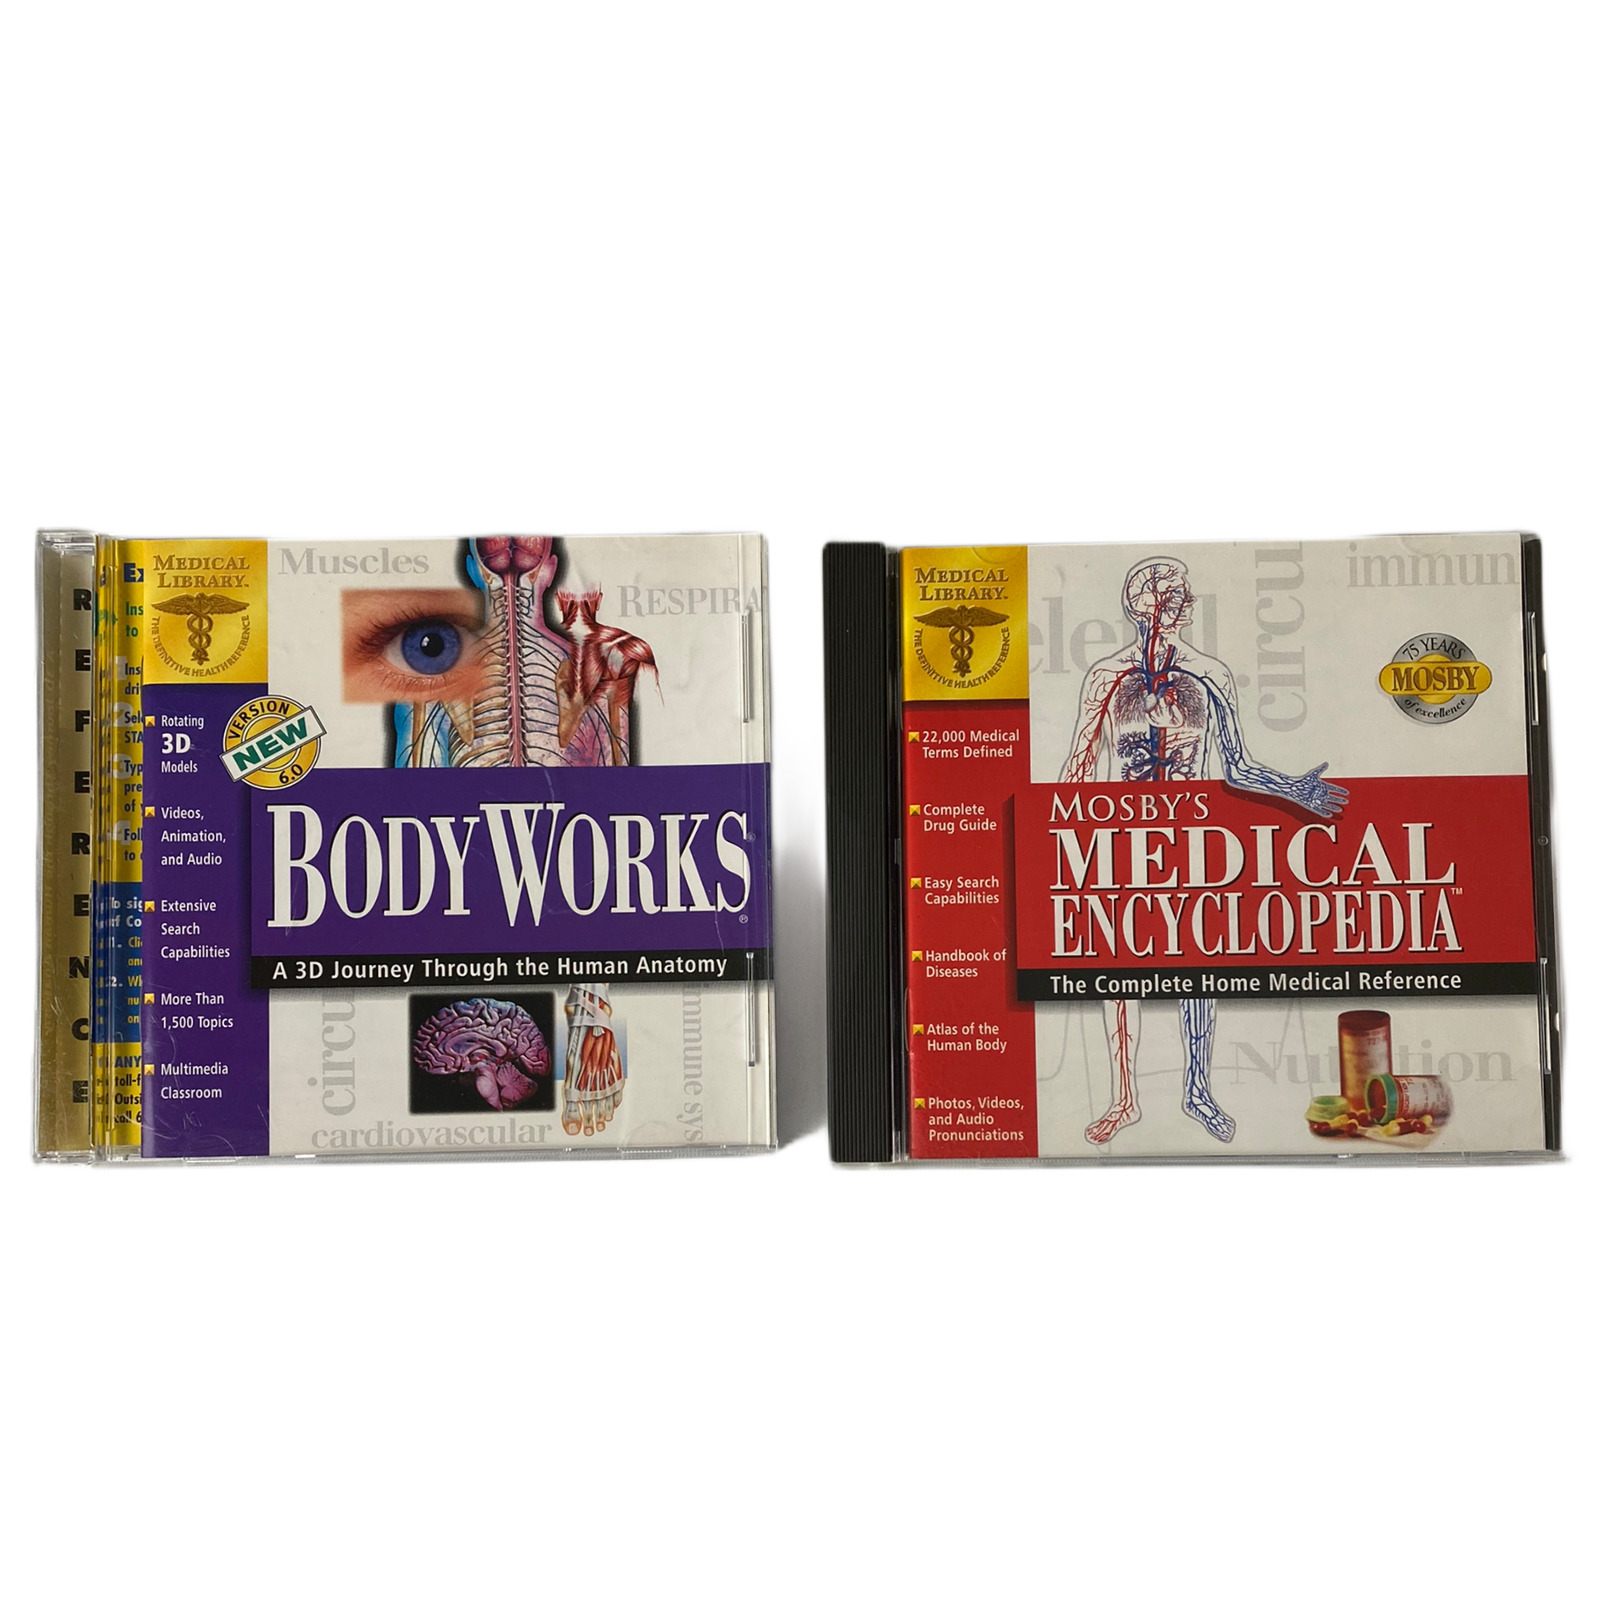 LOT OF 2: Mosby's Medical Encyclopedia CD-ROM 1997 and Body Works CD- ROM 1997